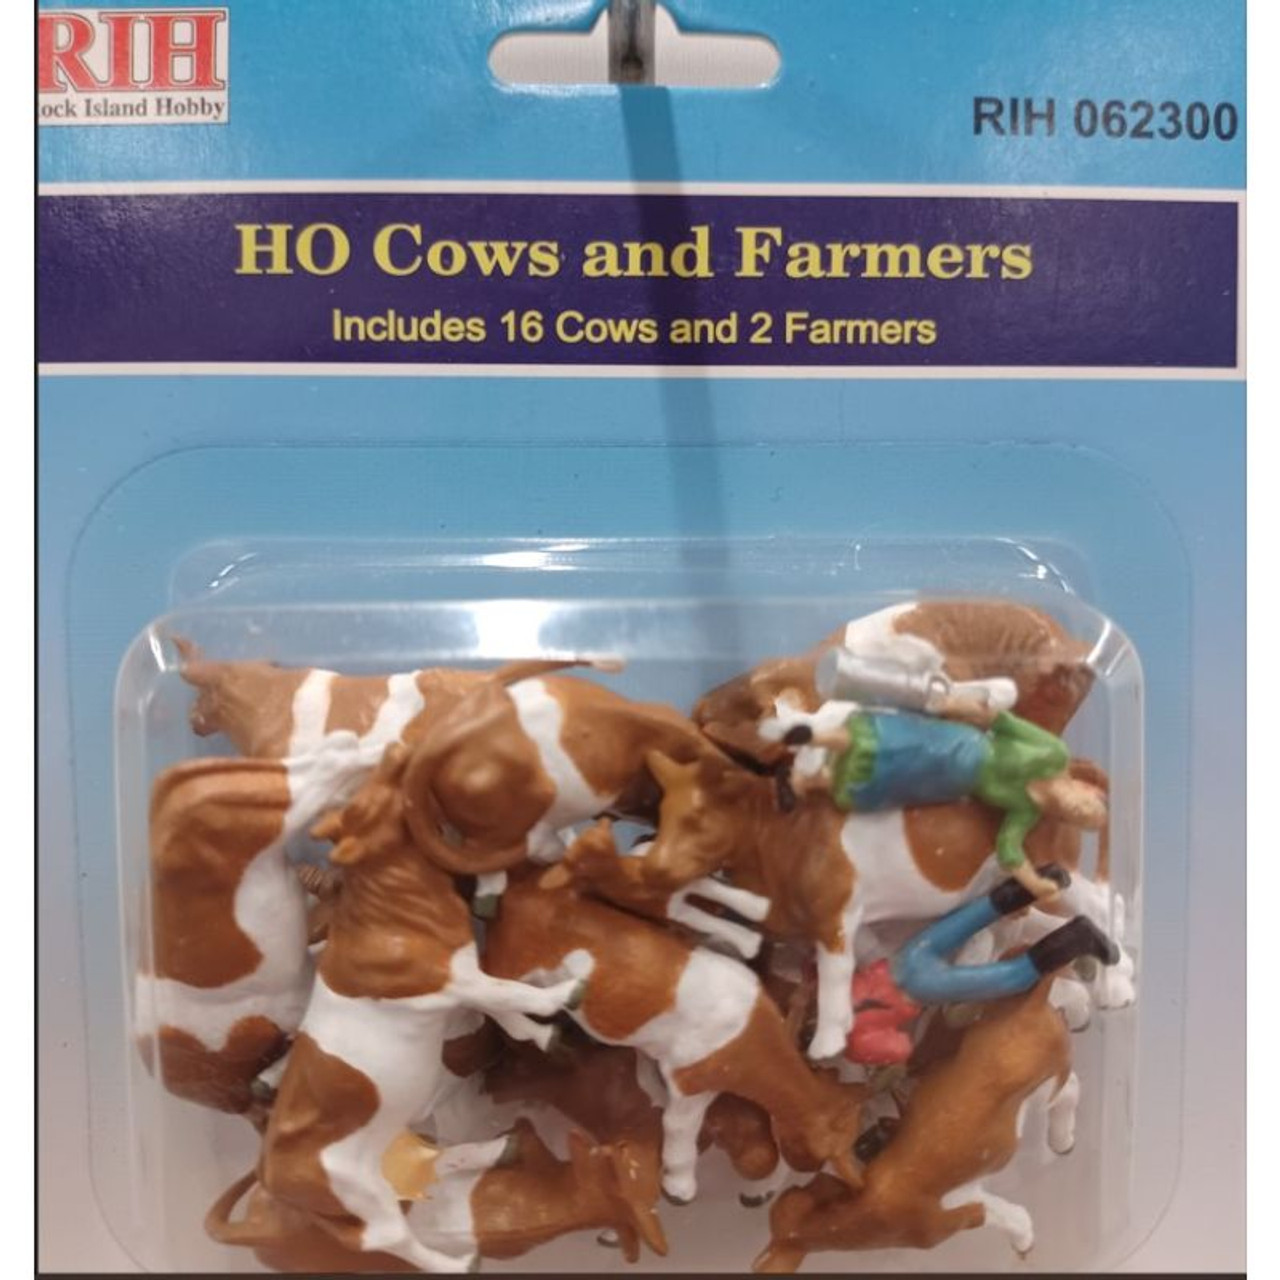 Rock Island Hobby 062300 - Cows and Farmers - Painted (16 cows, 2 farmers)  - HO Scale